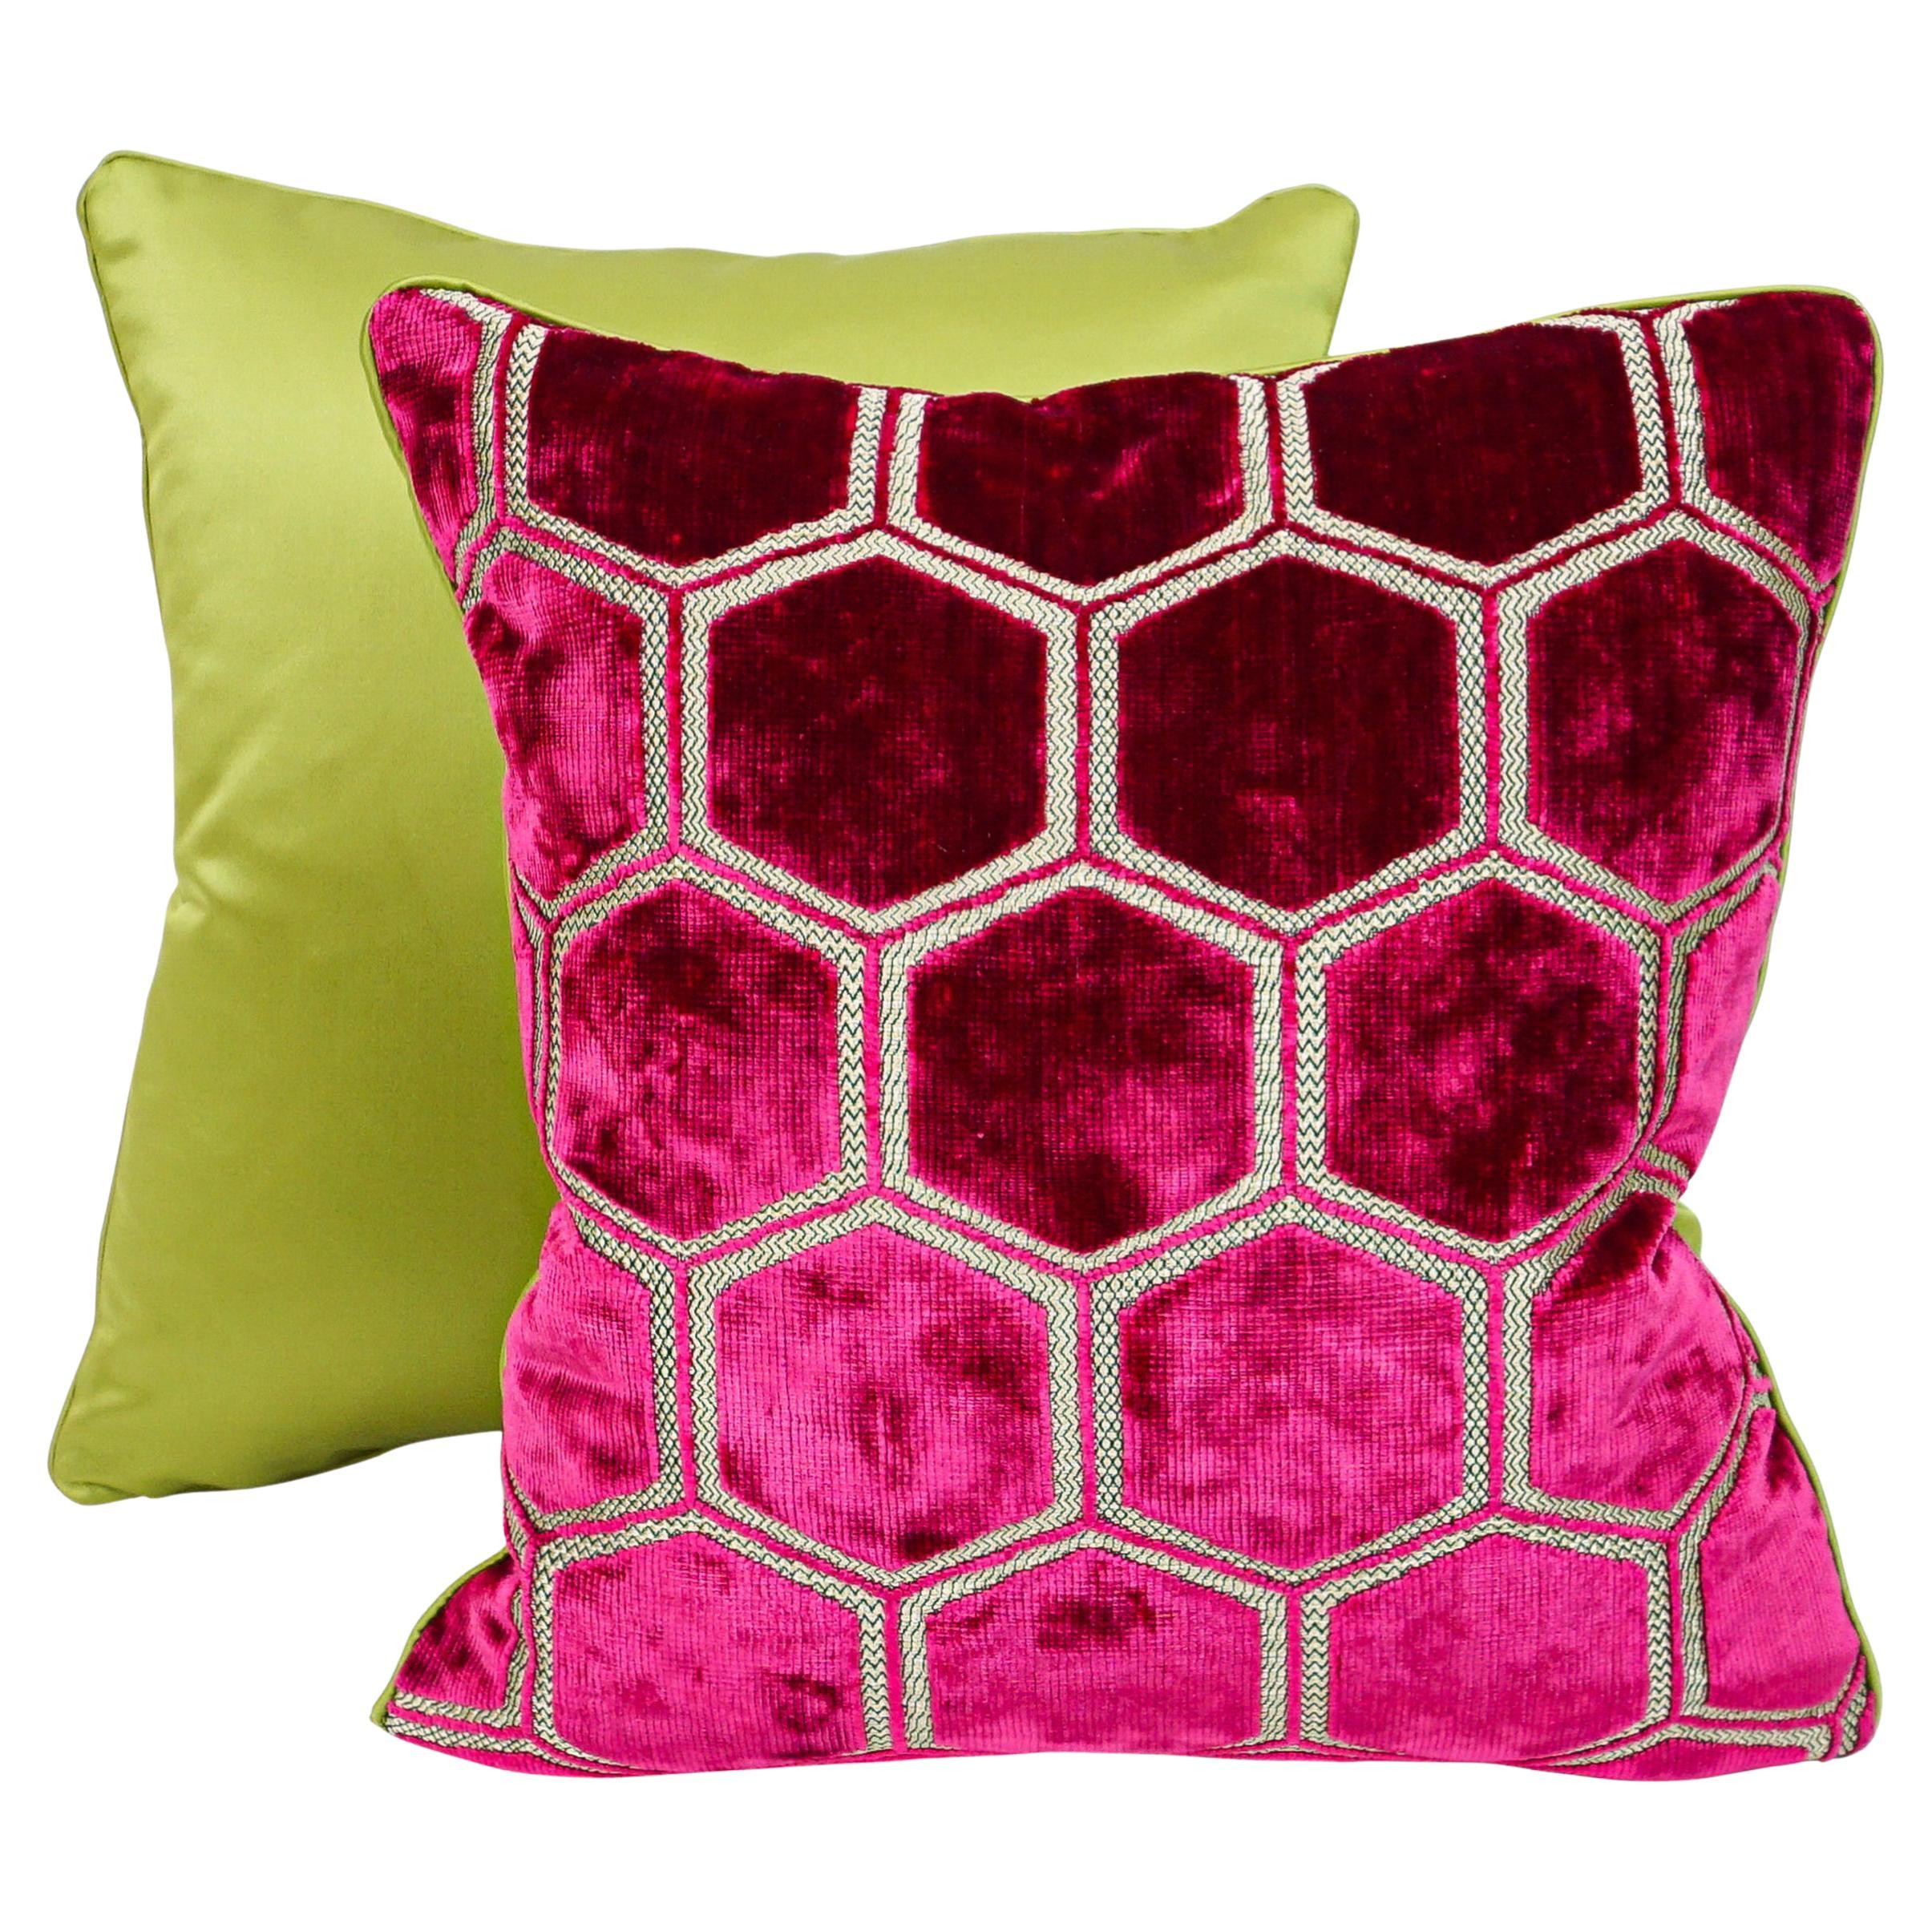 Fuchsia Hexagonal Cut Velvet Square Pillows with Chartreuse Sateen Back For Sale